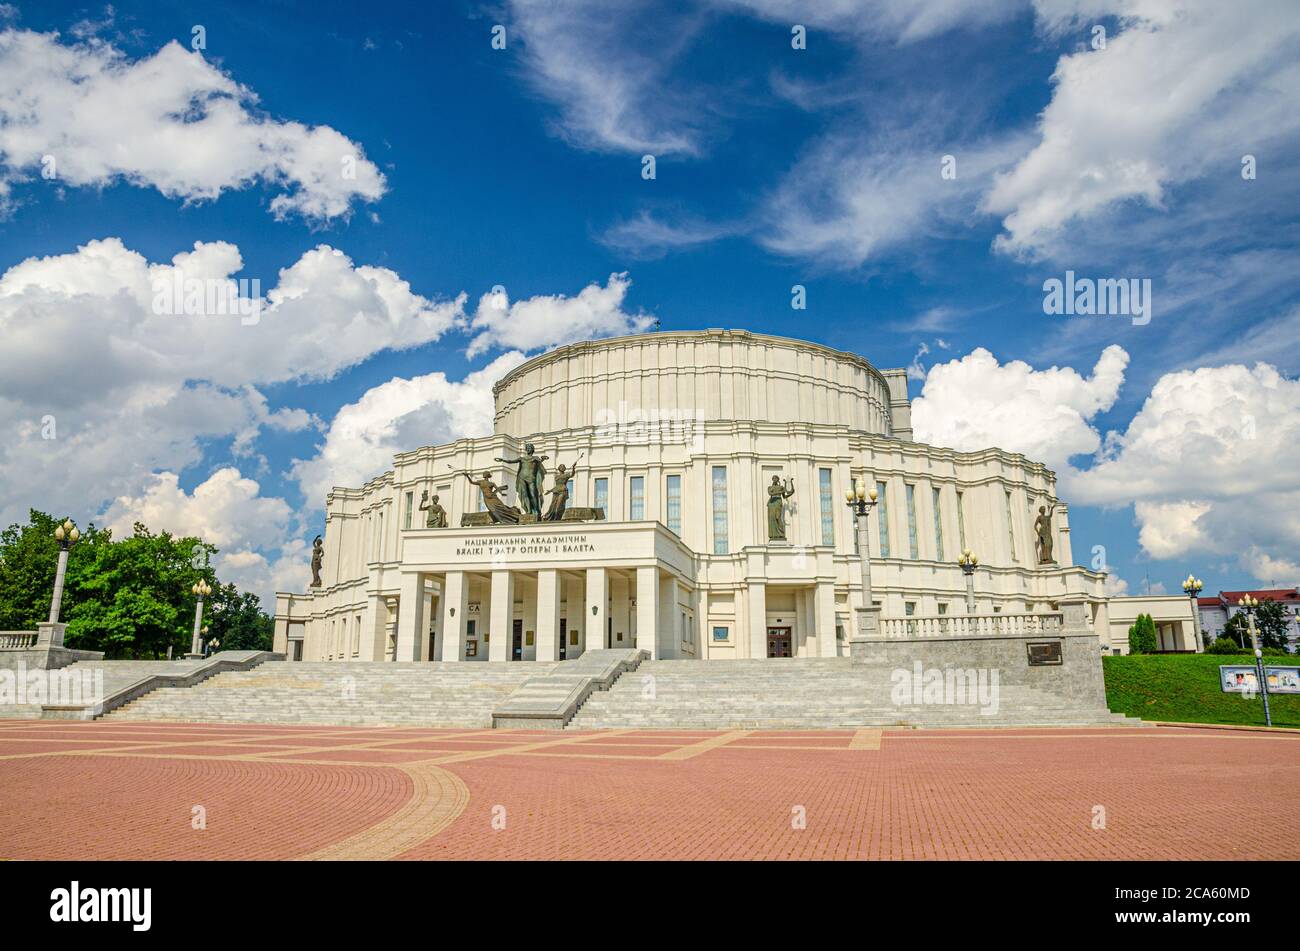 Minsk, Belarus, July 26, 2020: The National Academic Grand Opera and Ballet Theatre building in park in Trinity Hill district of historical city centre, blue sky white clouds in sunny summer day Stock Photo